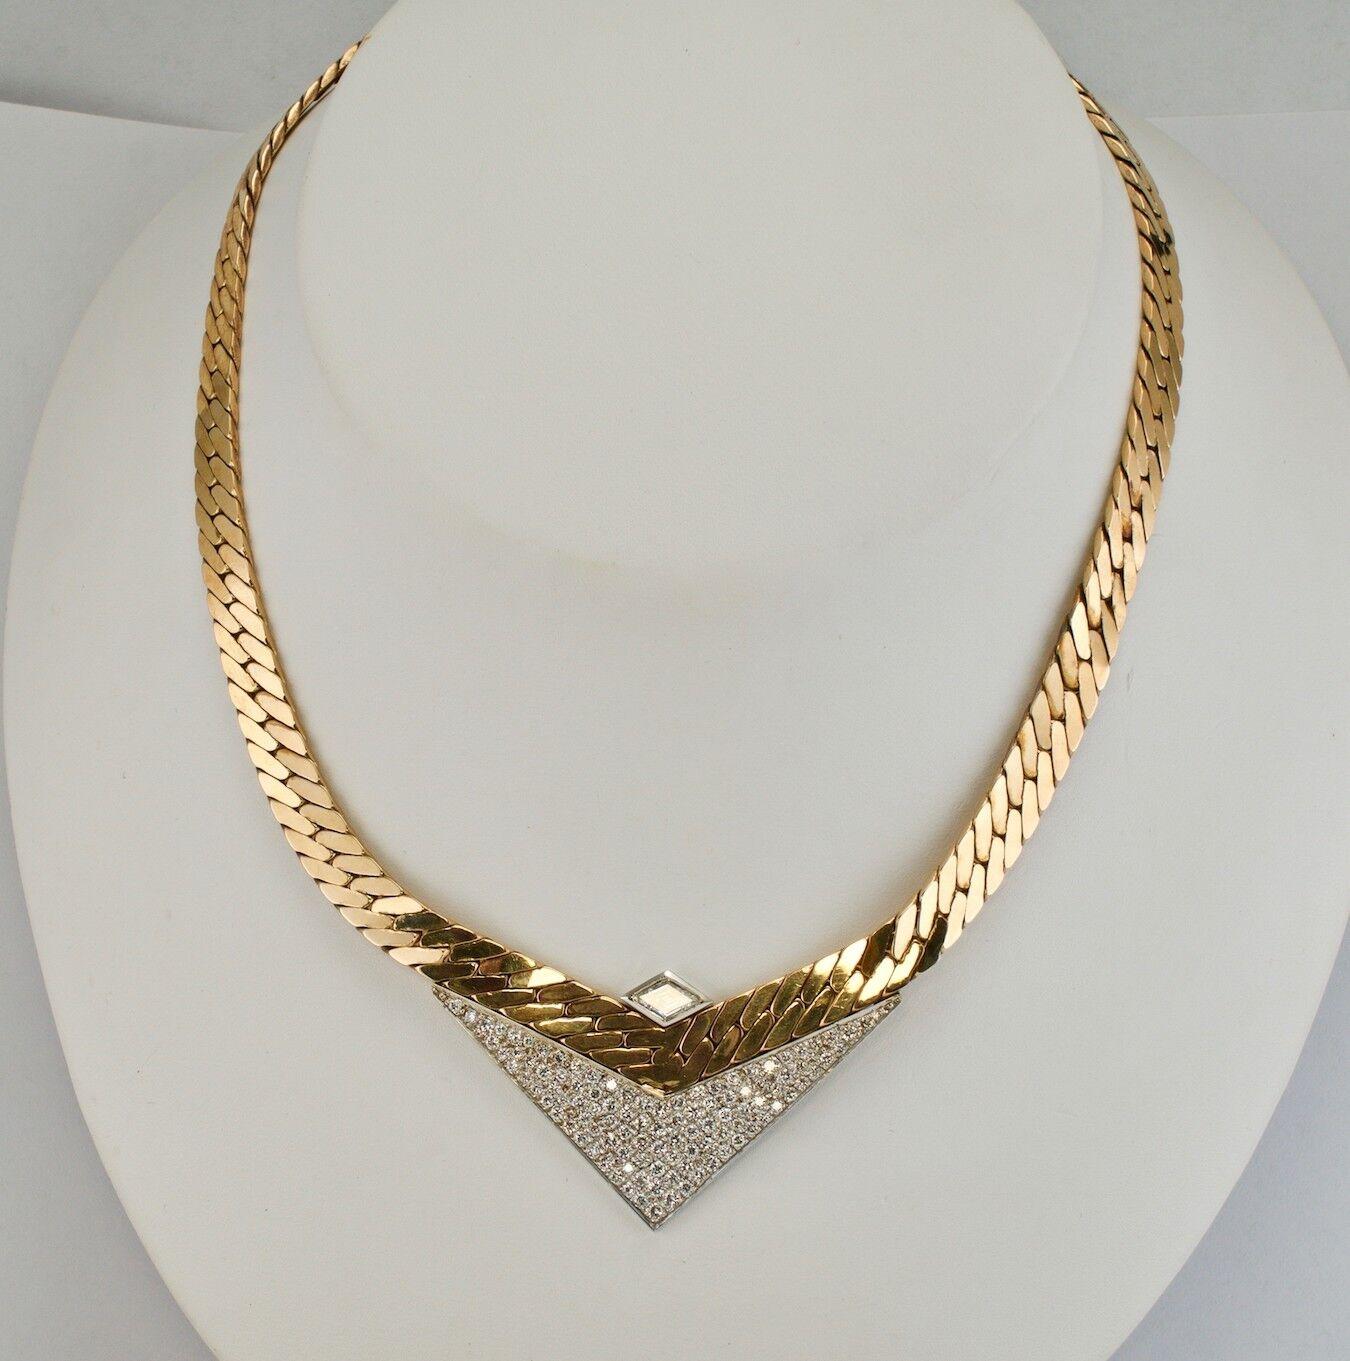 Diamond Necklace Choker 18K & 14K Gold Geometric V by Sande Italy

This amazing vintage necklace has been made in Italy and it is hallmarked Sande on the back. The necklace is crafted in a combination of solid 14K Yellow Gold and 18K White Gold. The